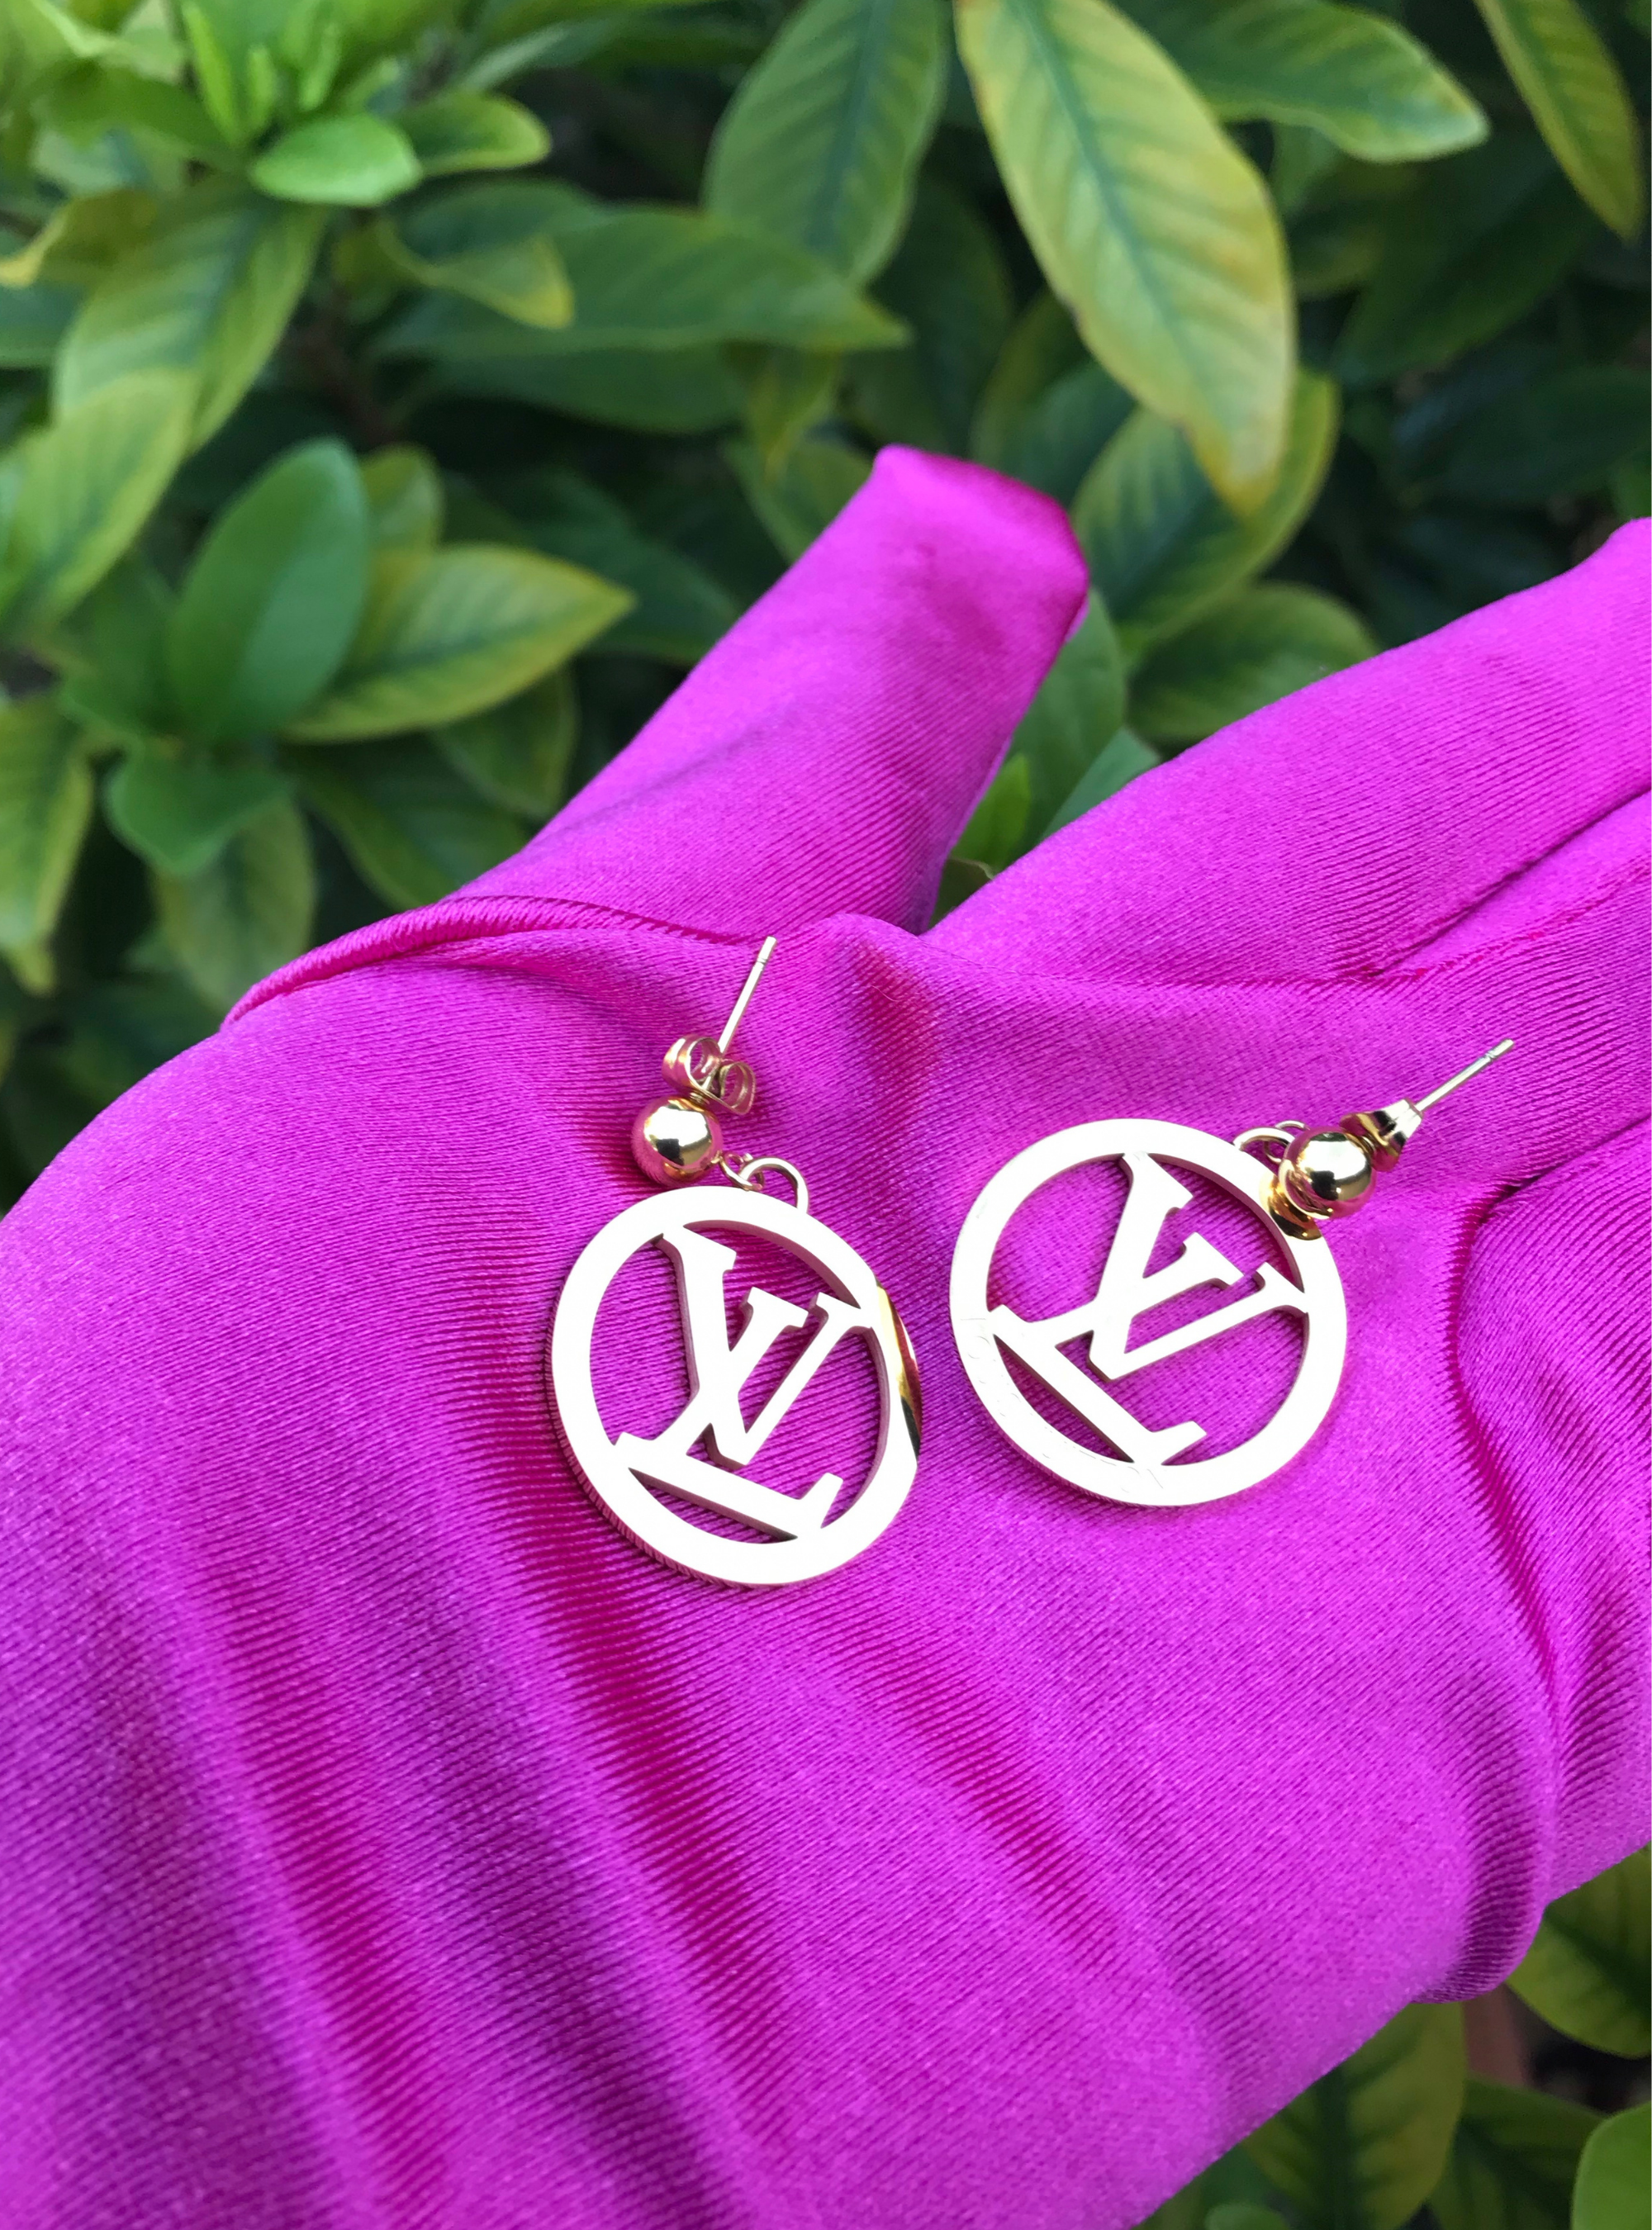 Repurposed Designer Jewelry Louis Vuitton Button Earrings with